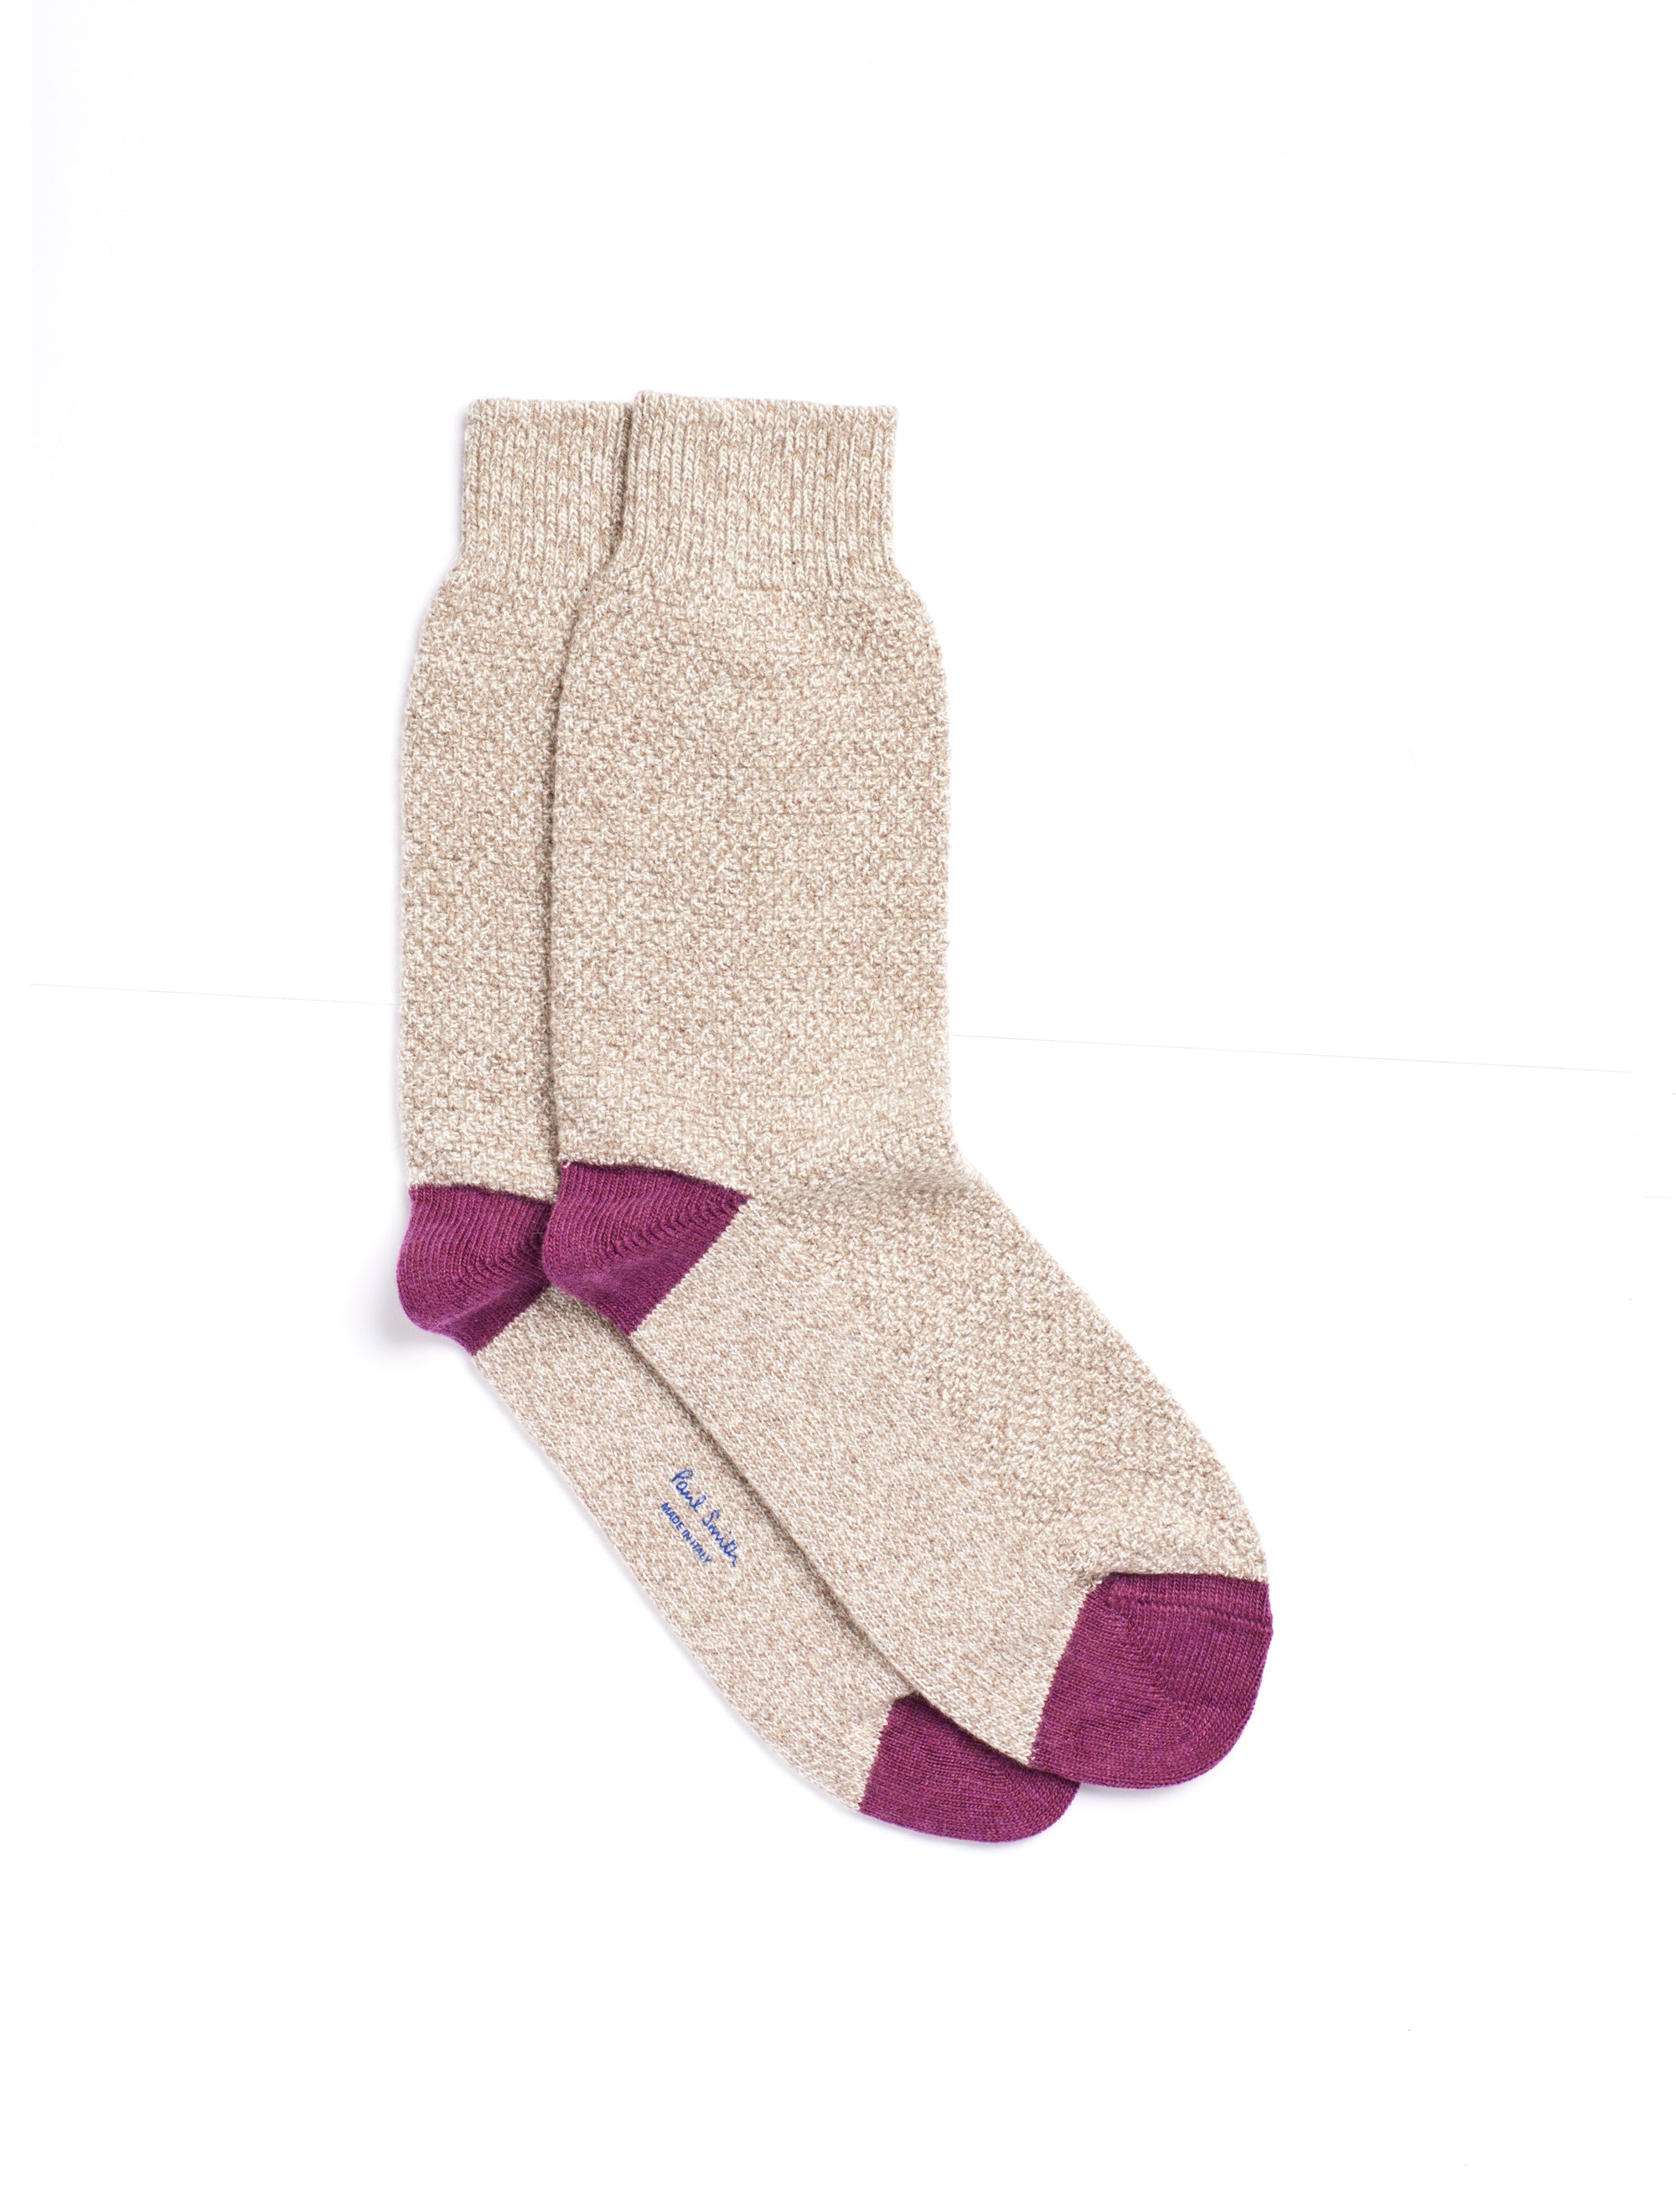 PAUL SMITH Woolen Slouch Socks in Natural